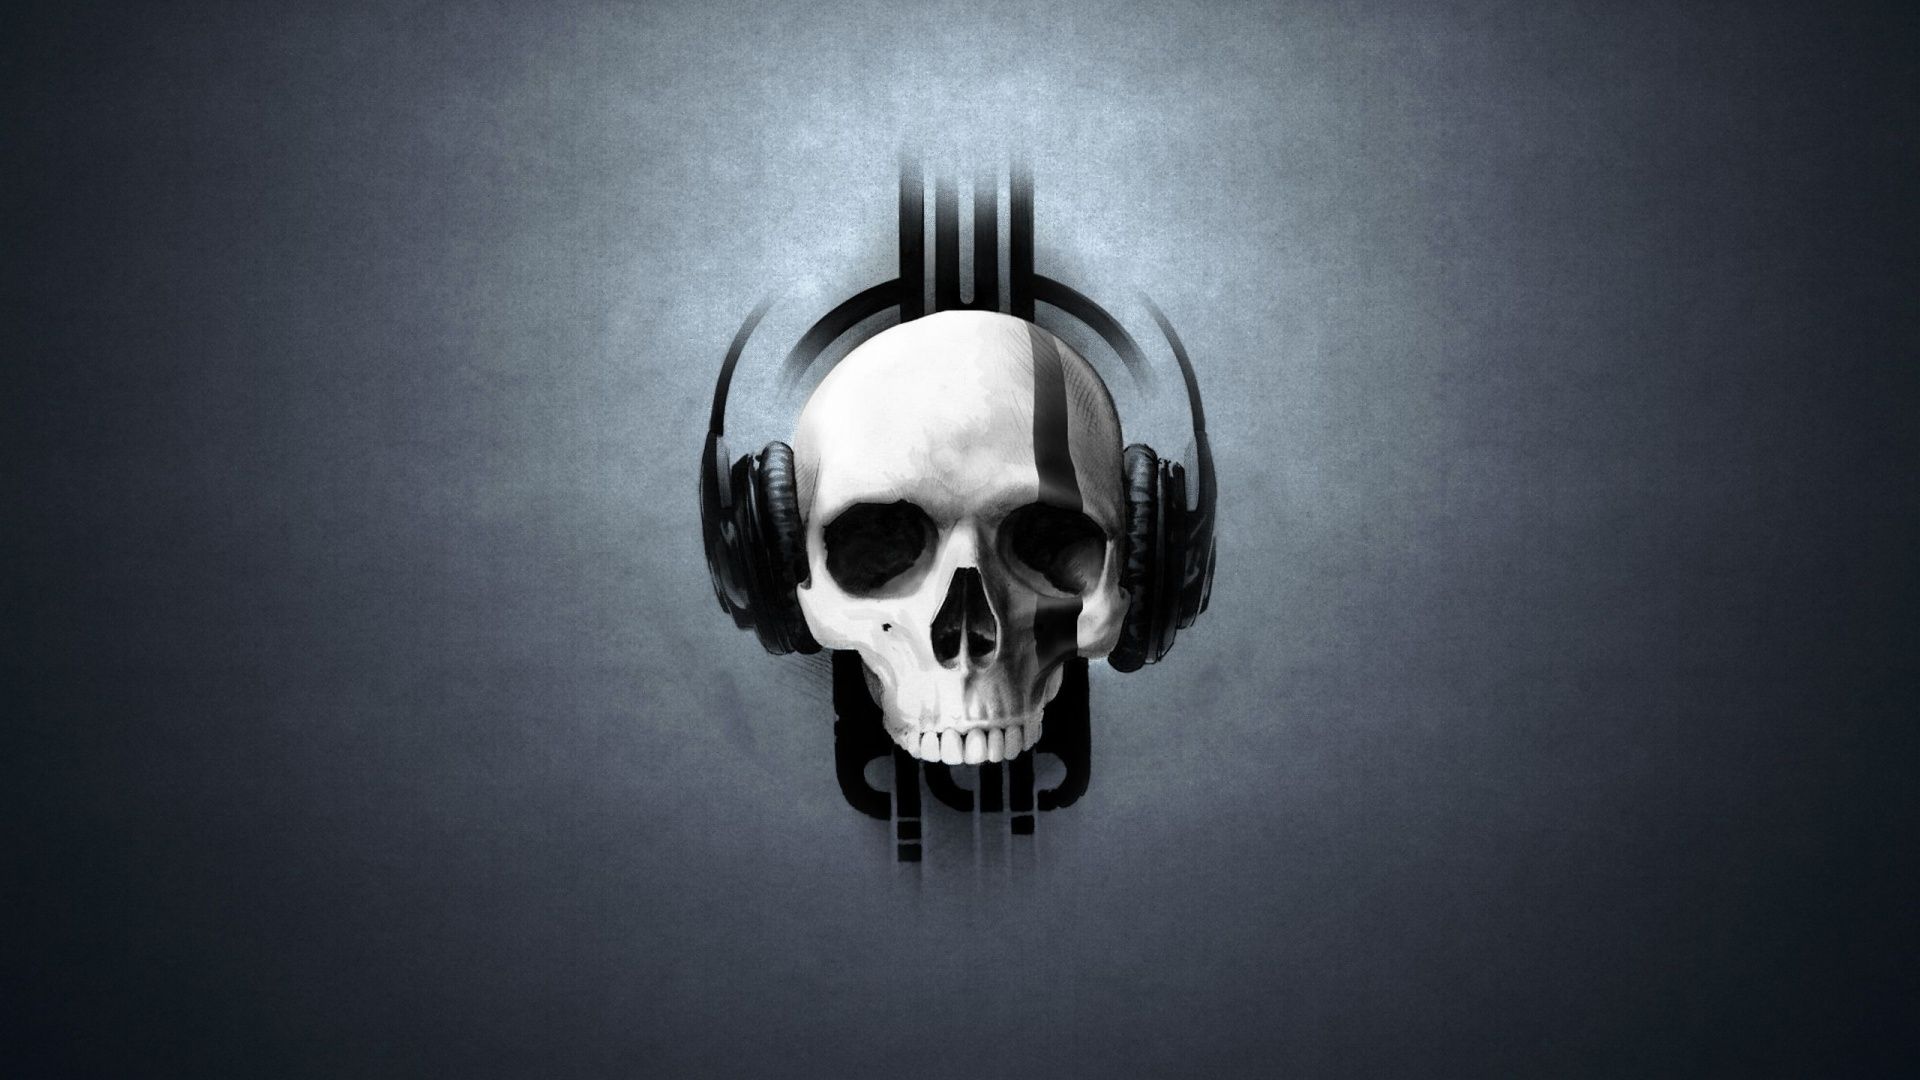 Cool Skull Wallpaper Wallpapers, Backgrounds, Images, Art Photos